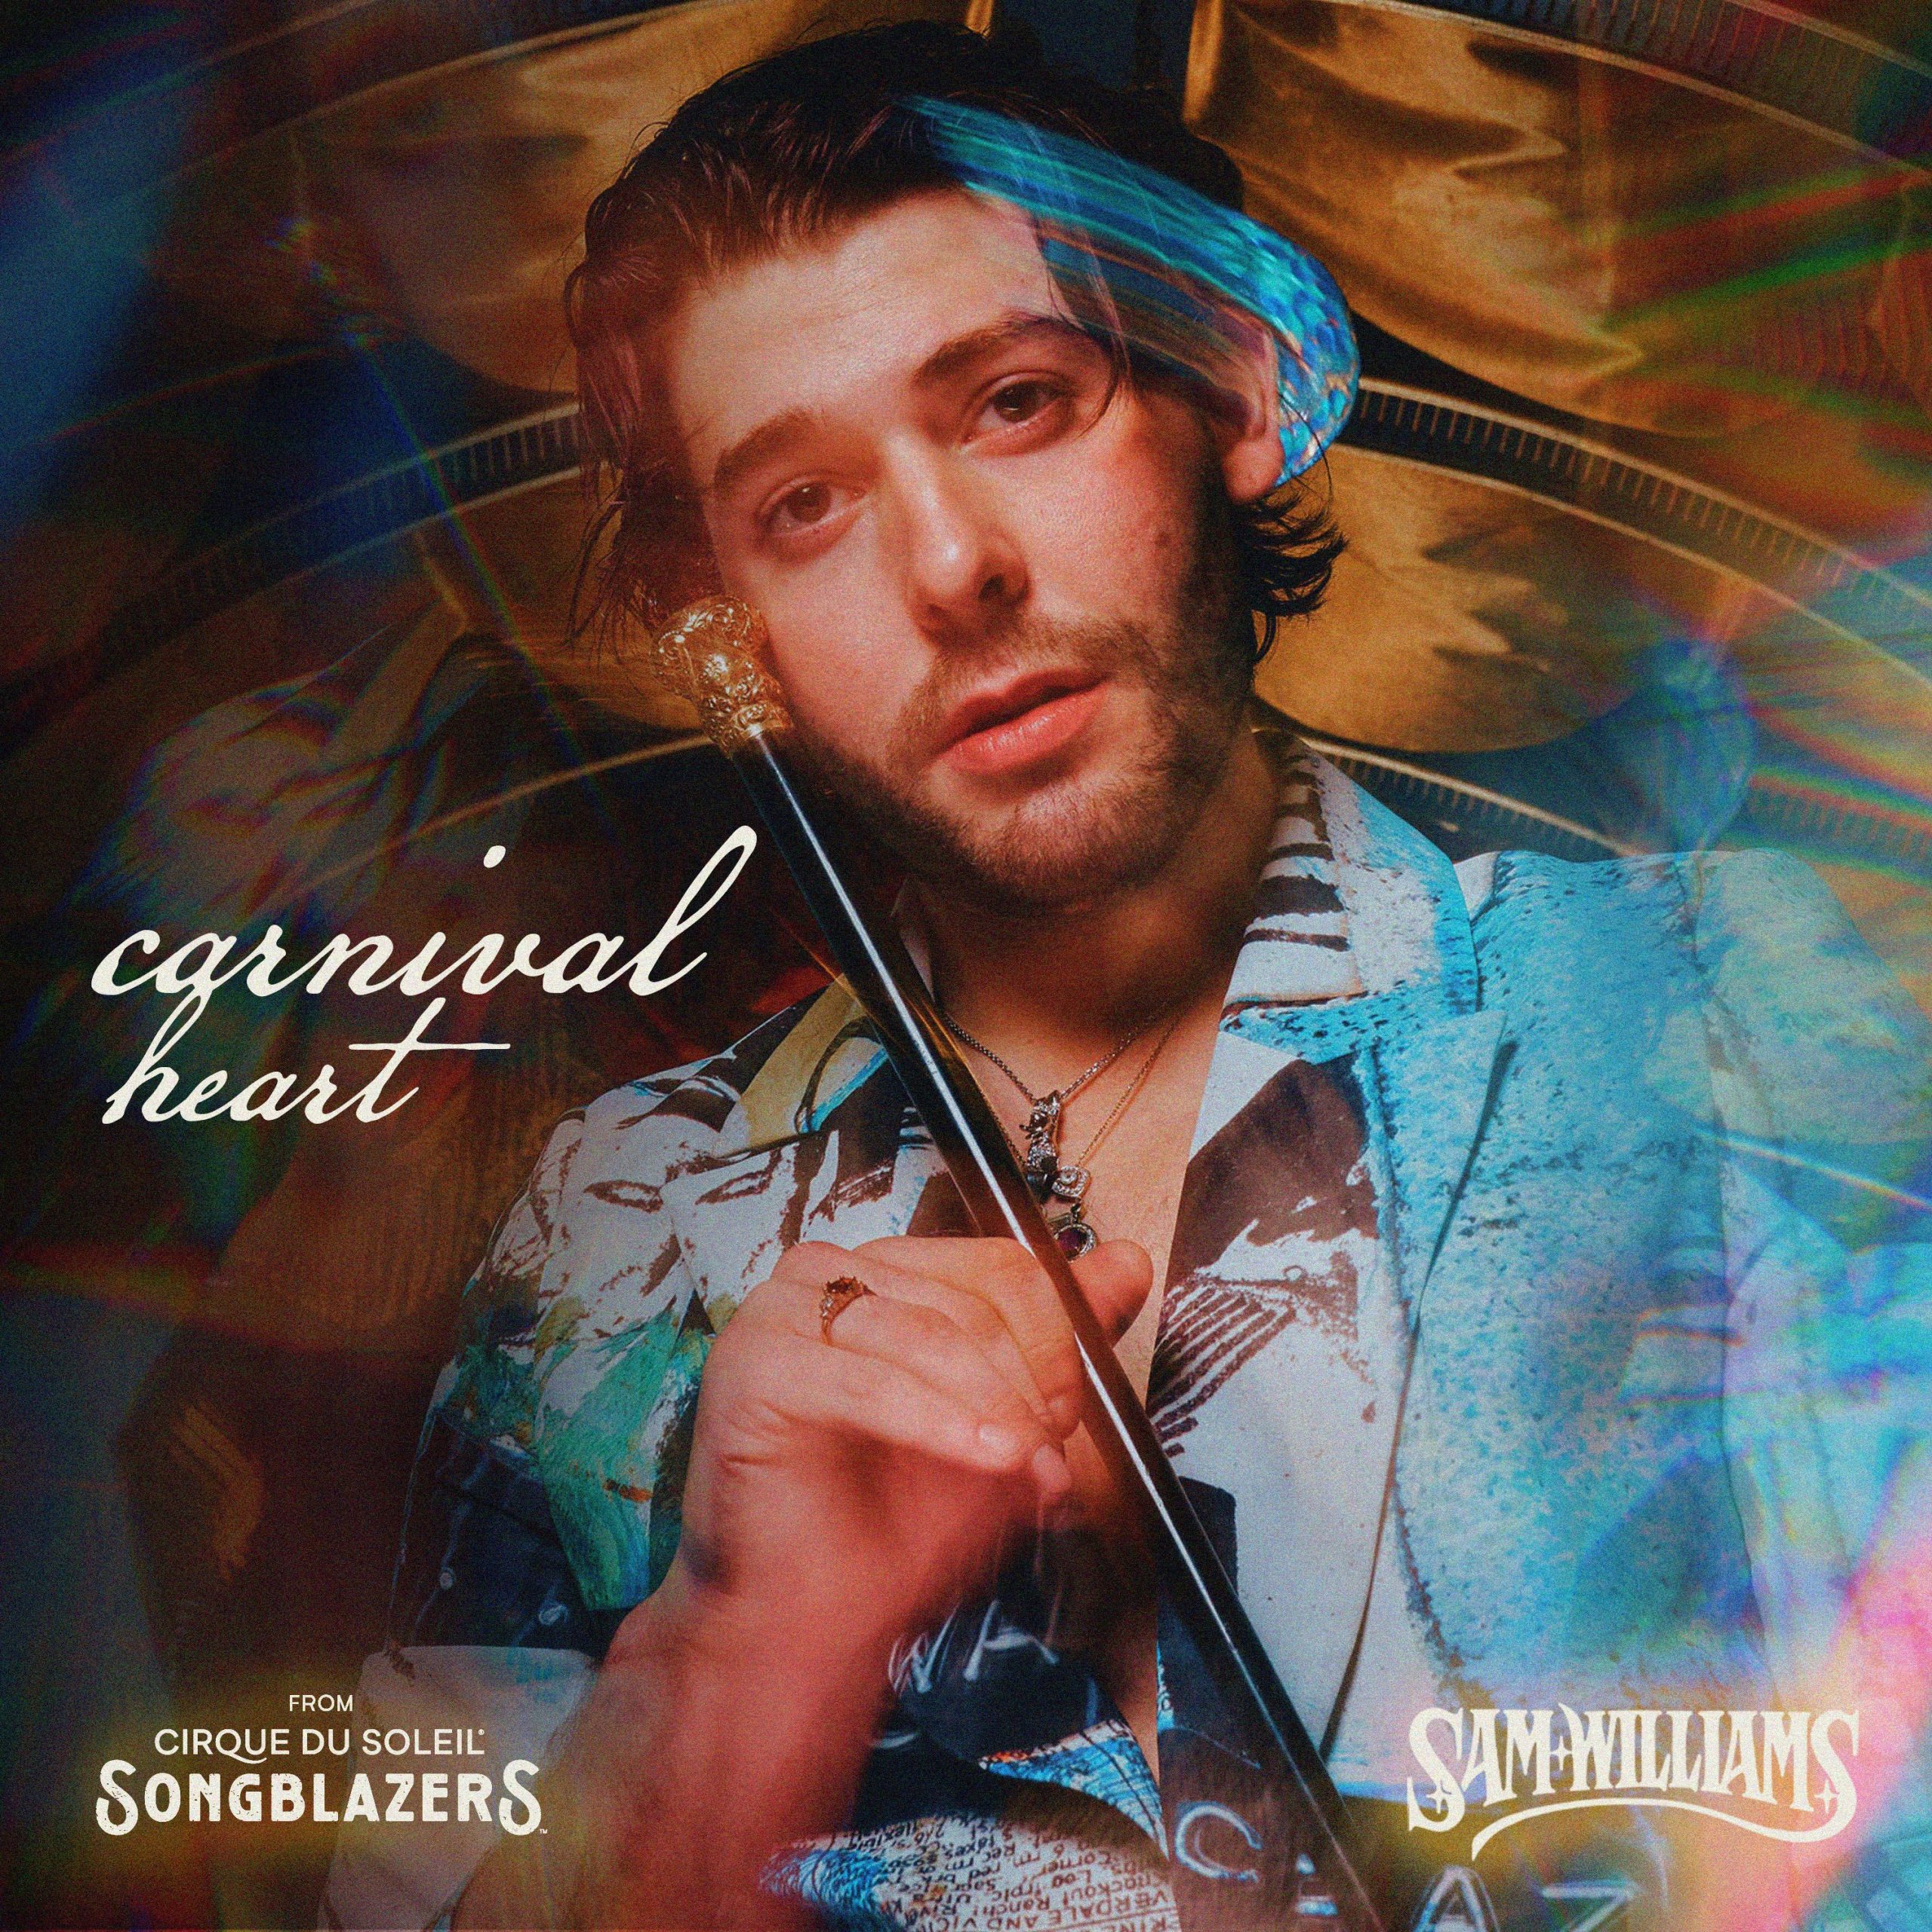 Sam Williams Shares New Song “Carnival Heart” – Out Now